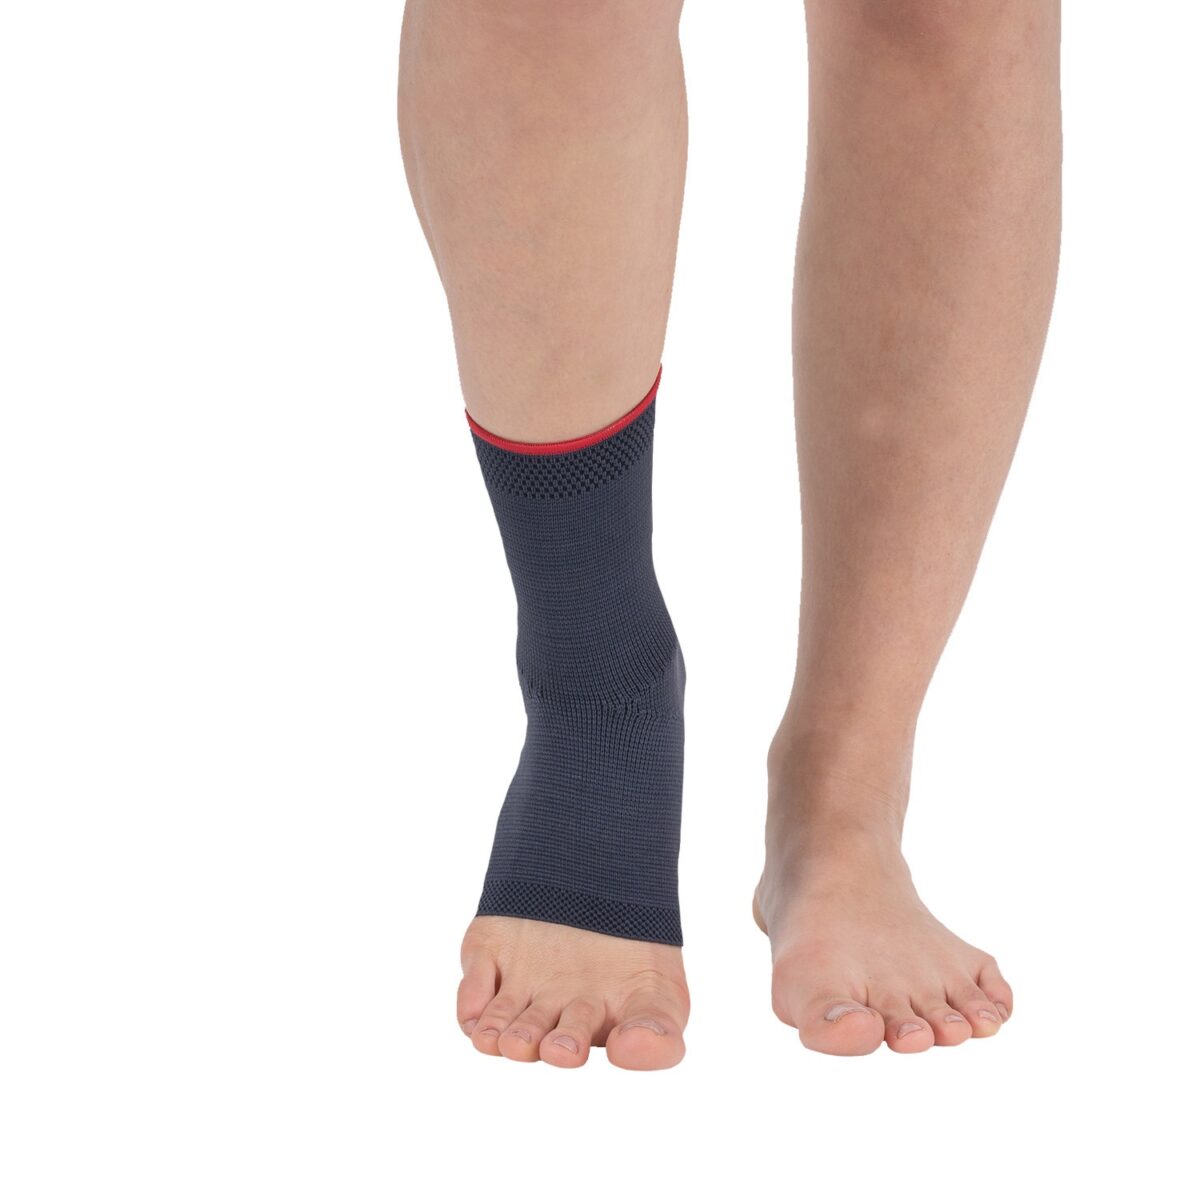 wingmed orthopedic equipments W602 woven ankle support 20 1 1